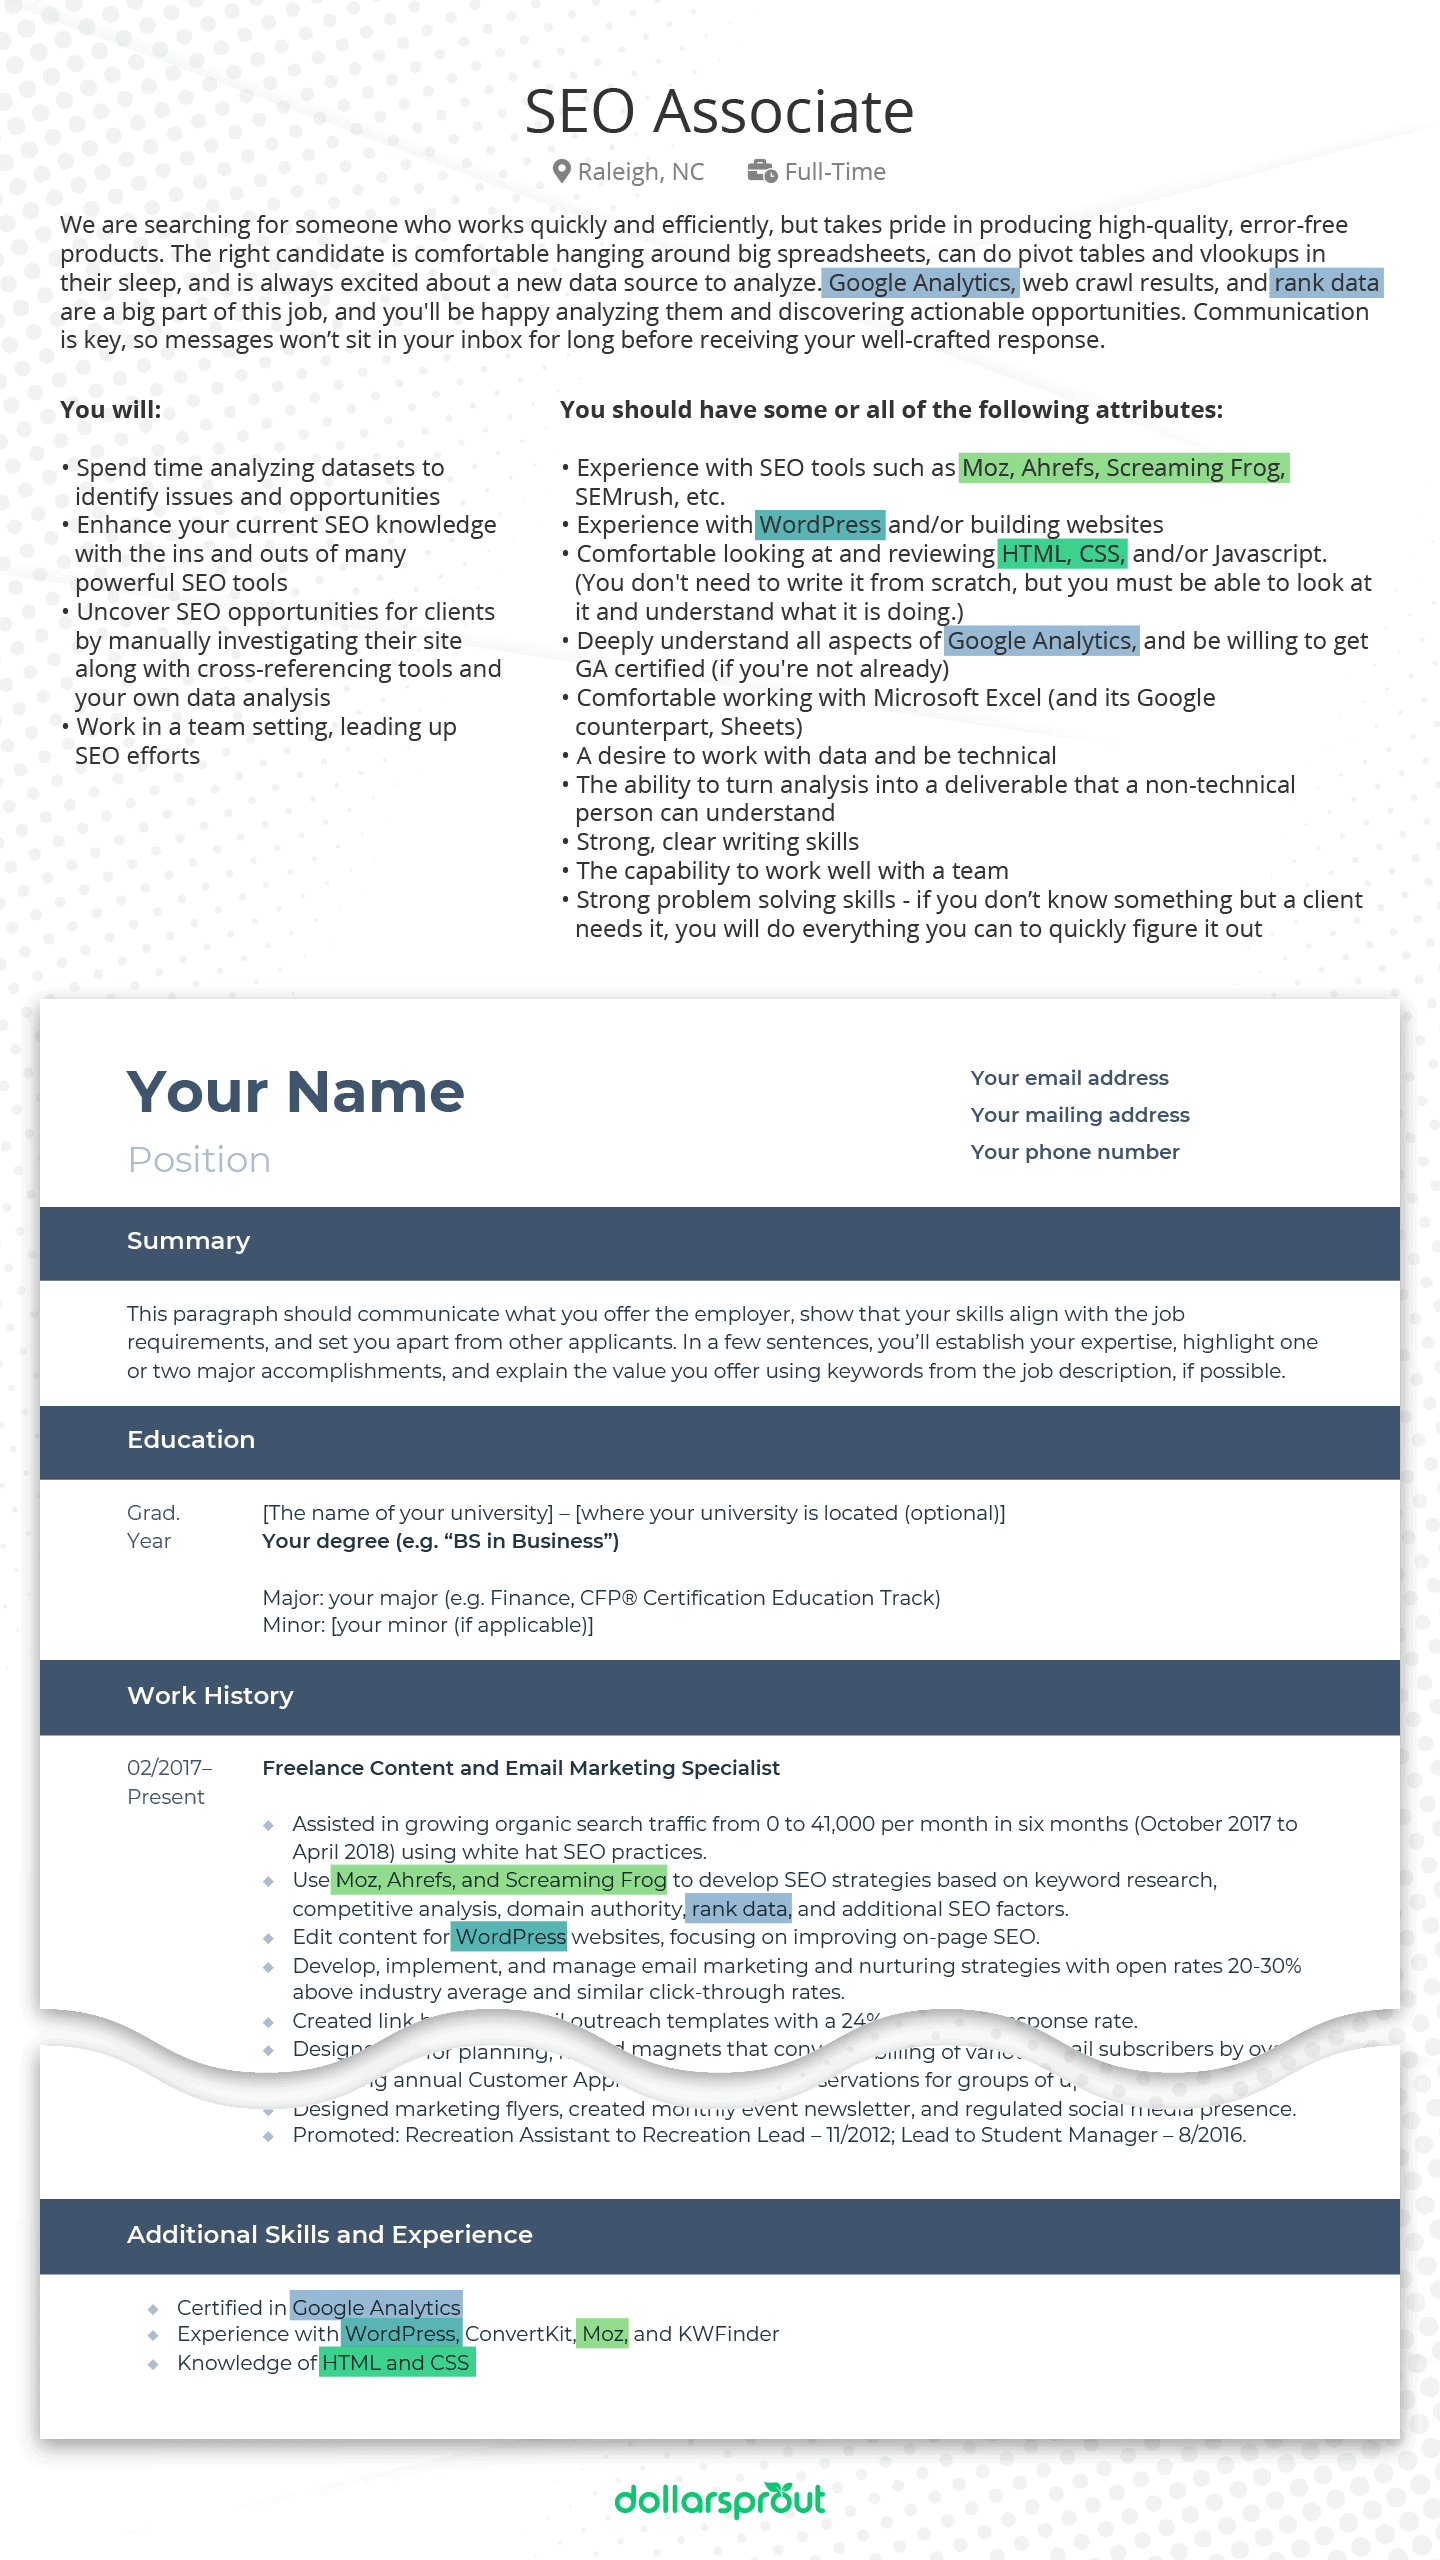 Example of using keywords from a job description in your resume